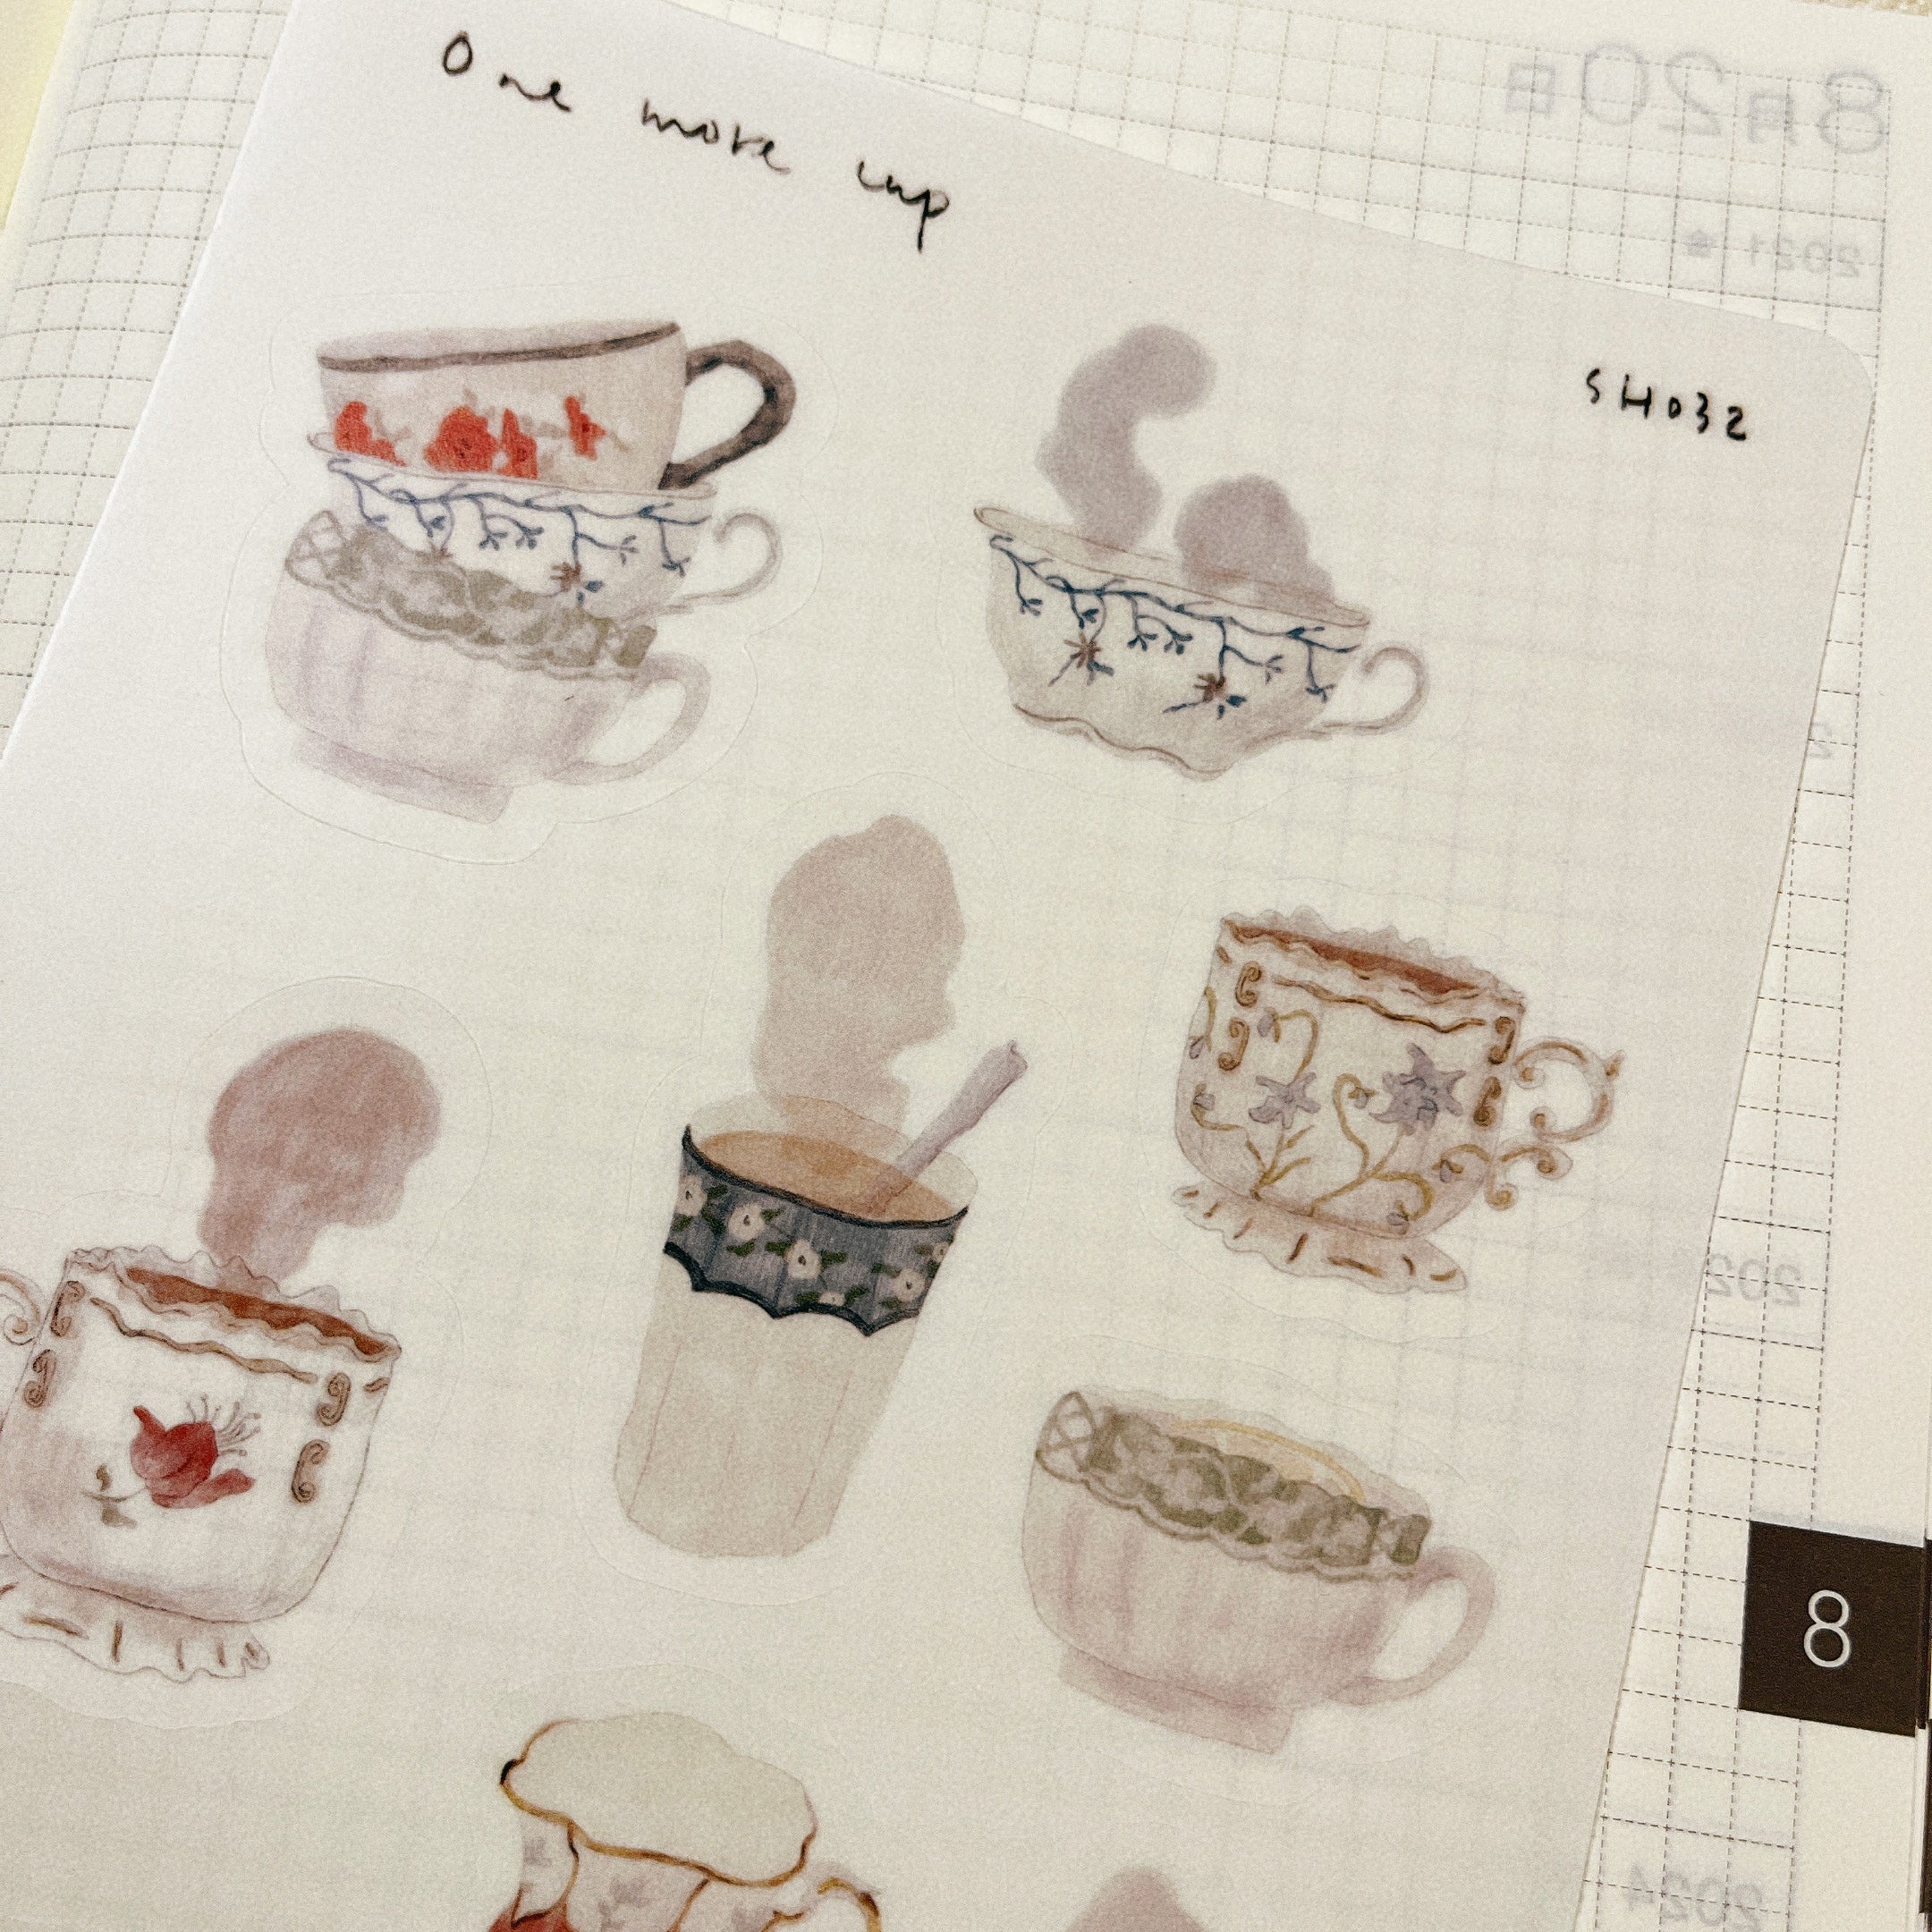 sticker sheet | one more cup | homebody